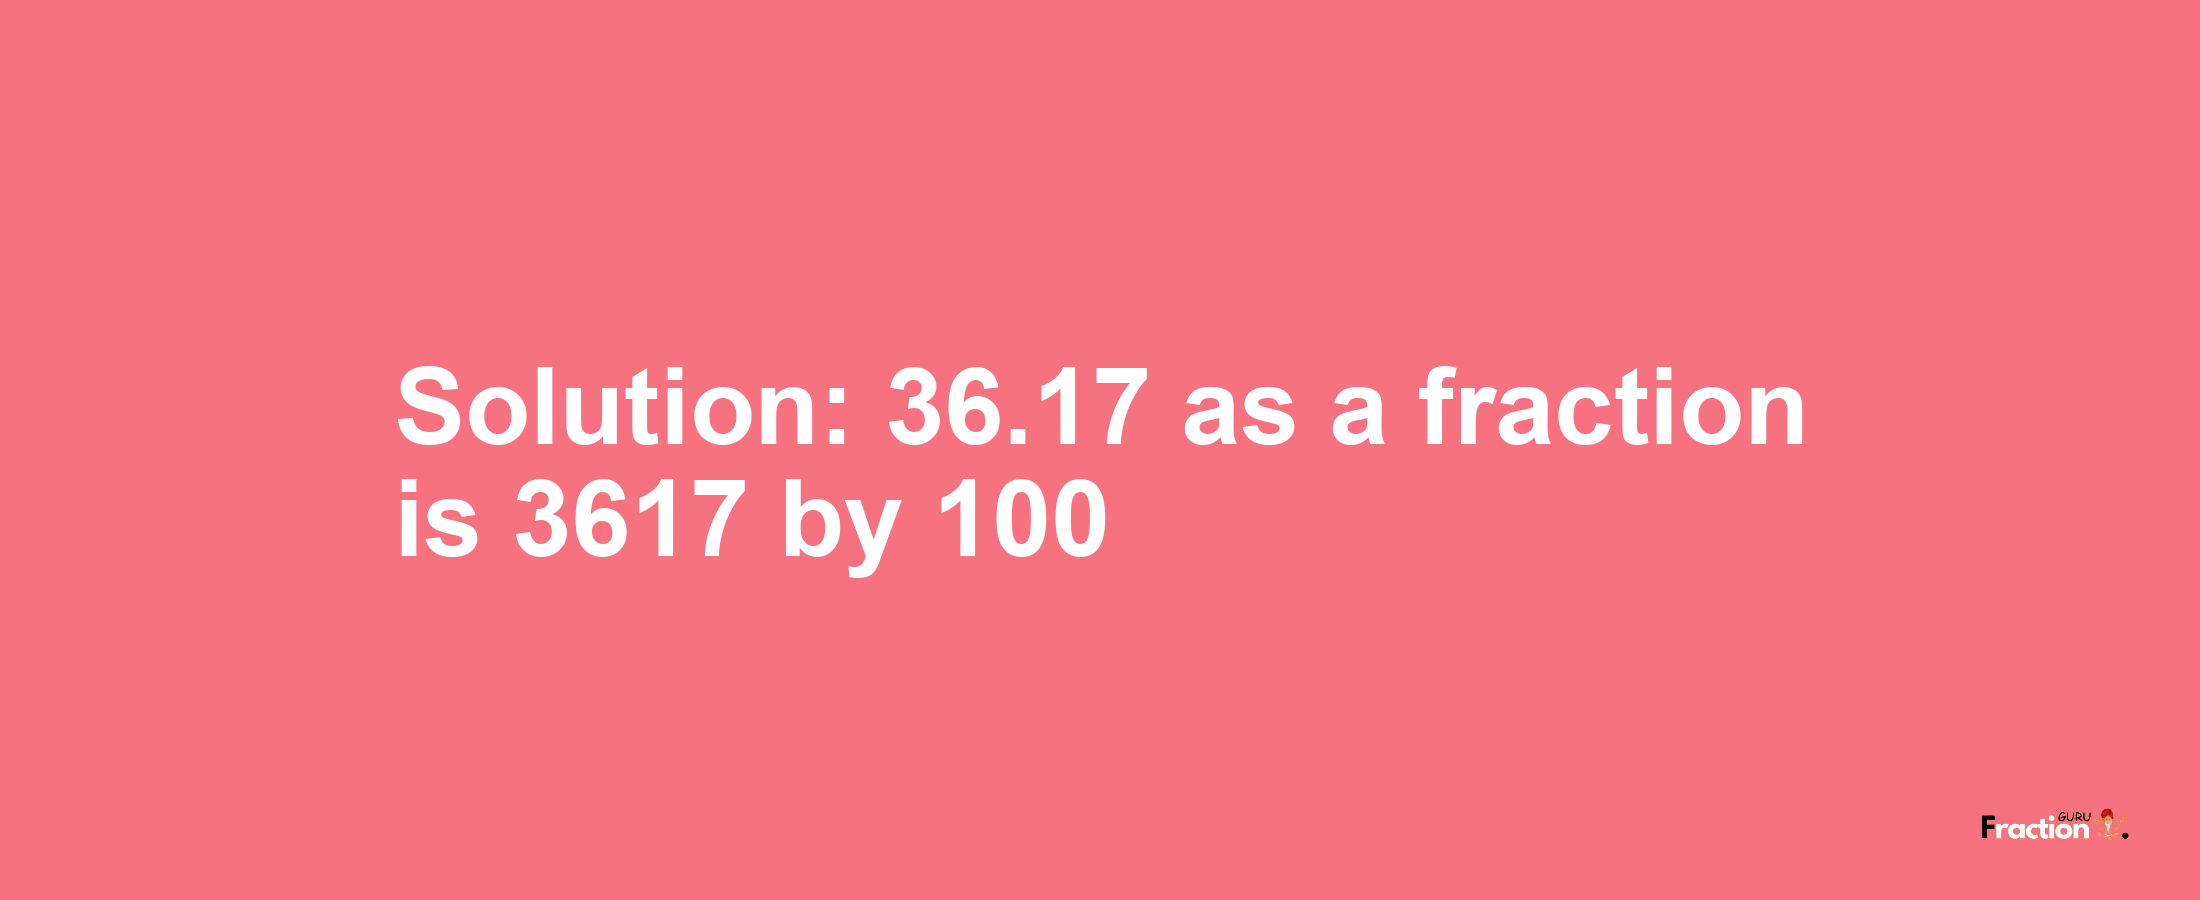 Solution:36.17 as a fraction is 3617/100